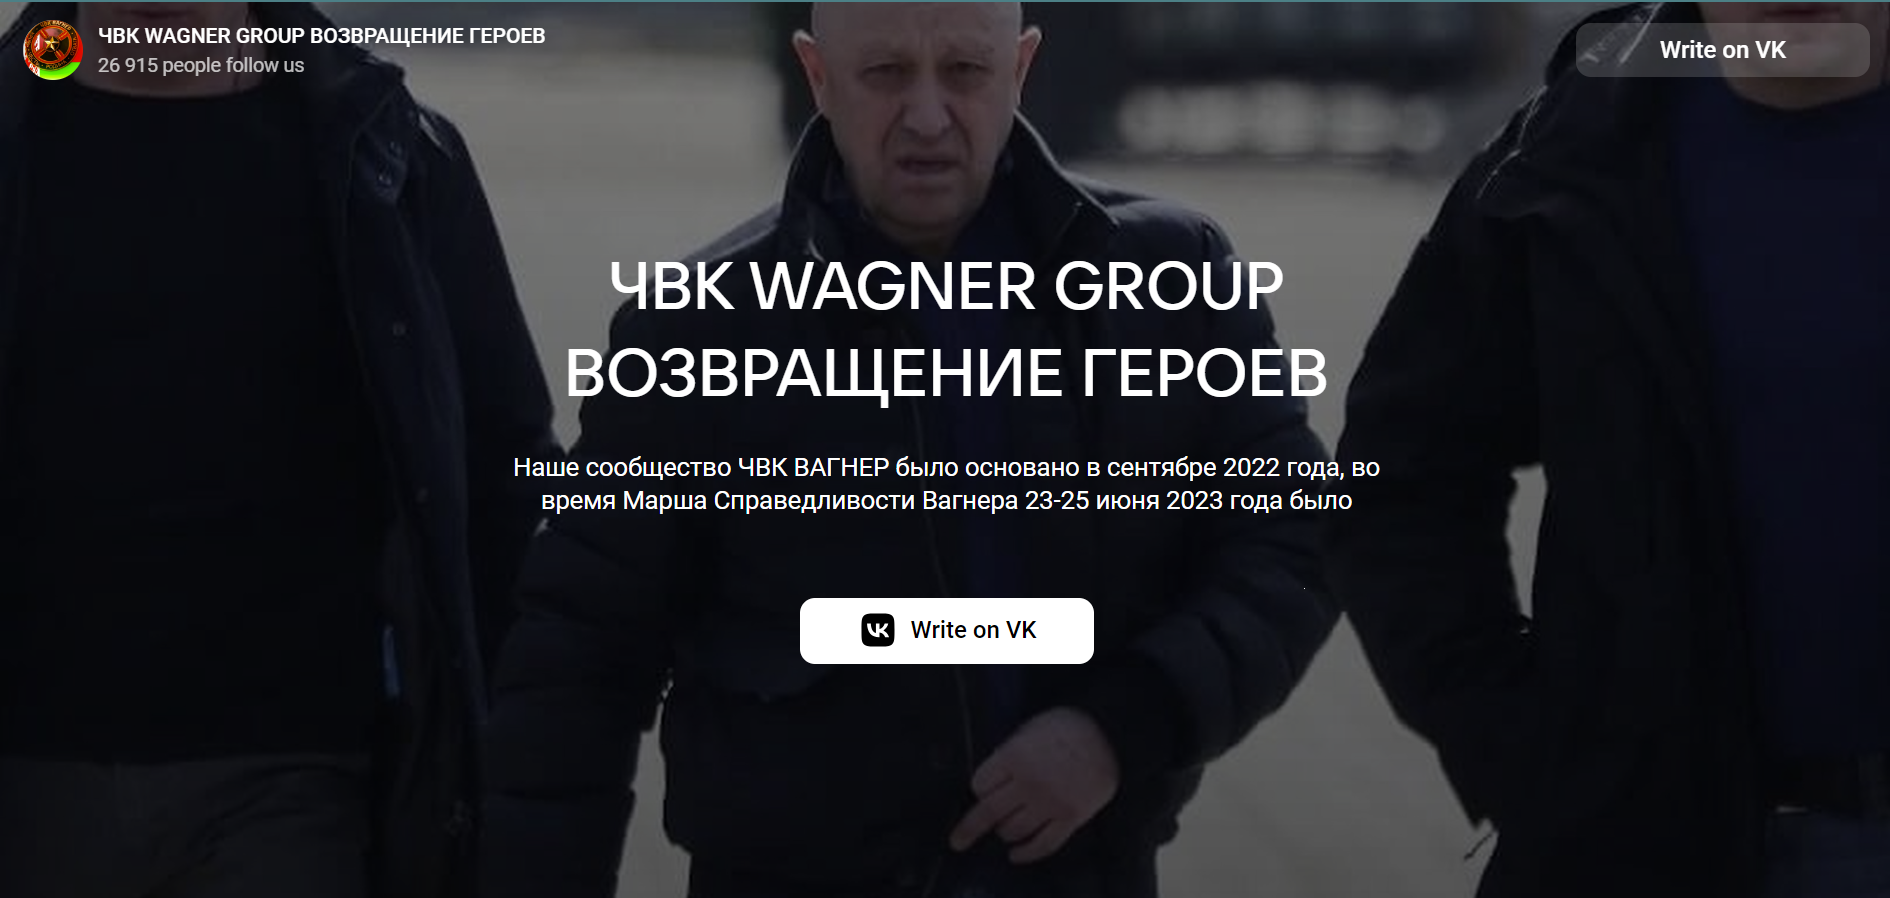 Wagner communities continue to thrive on VK despite Russian government crackdown